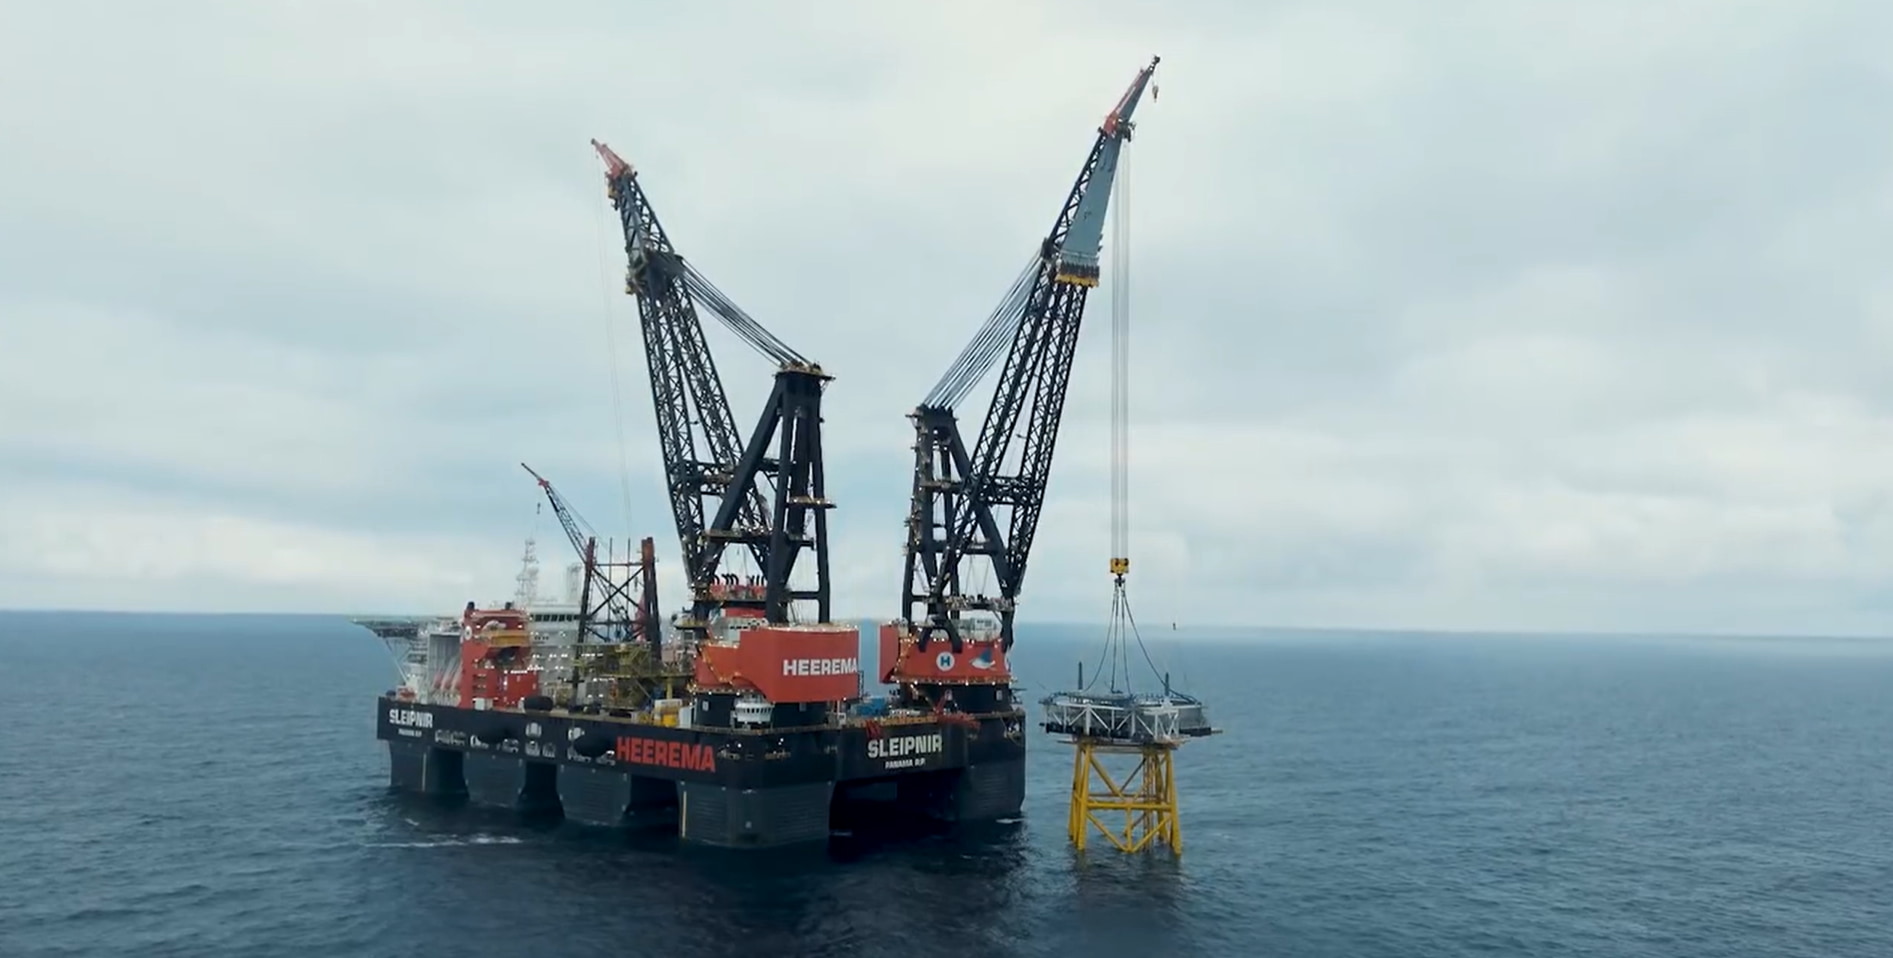 Fenris jacket and PDM installation complete; Source: Aker BP